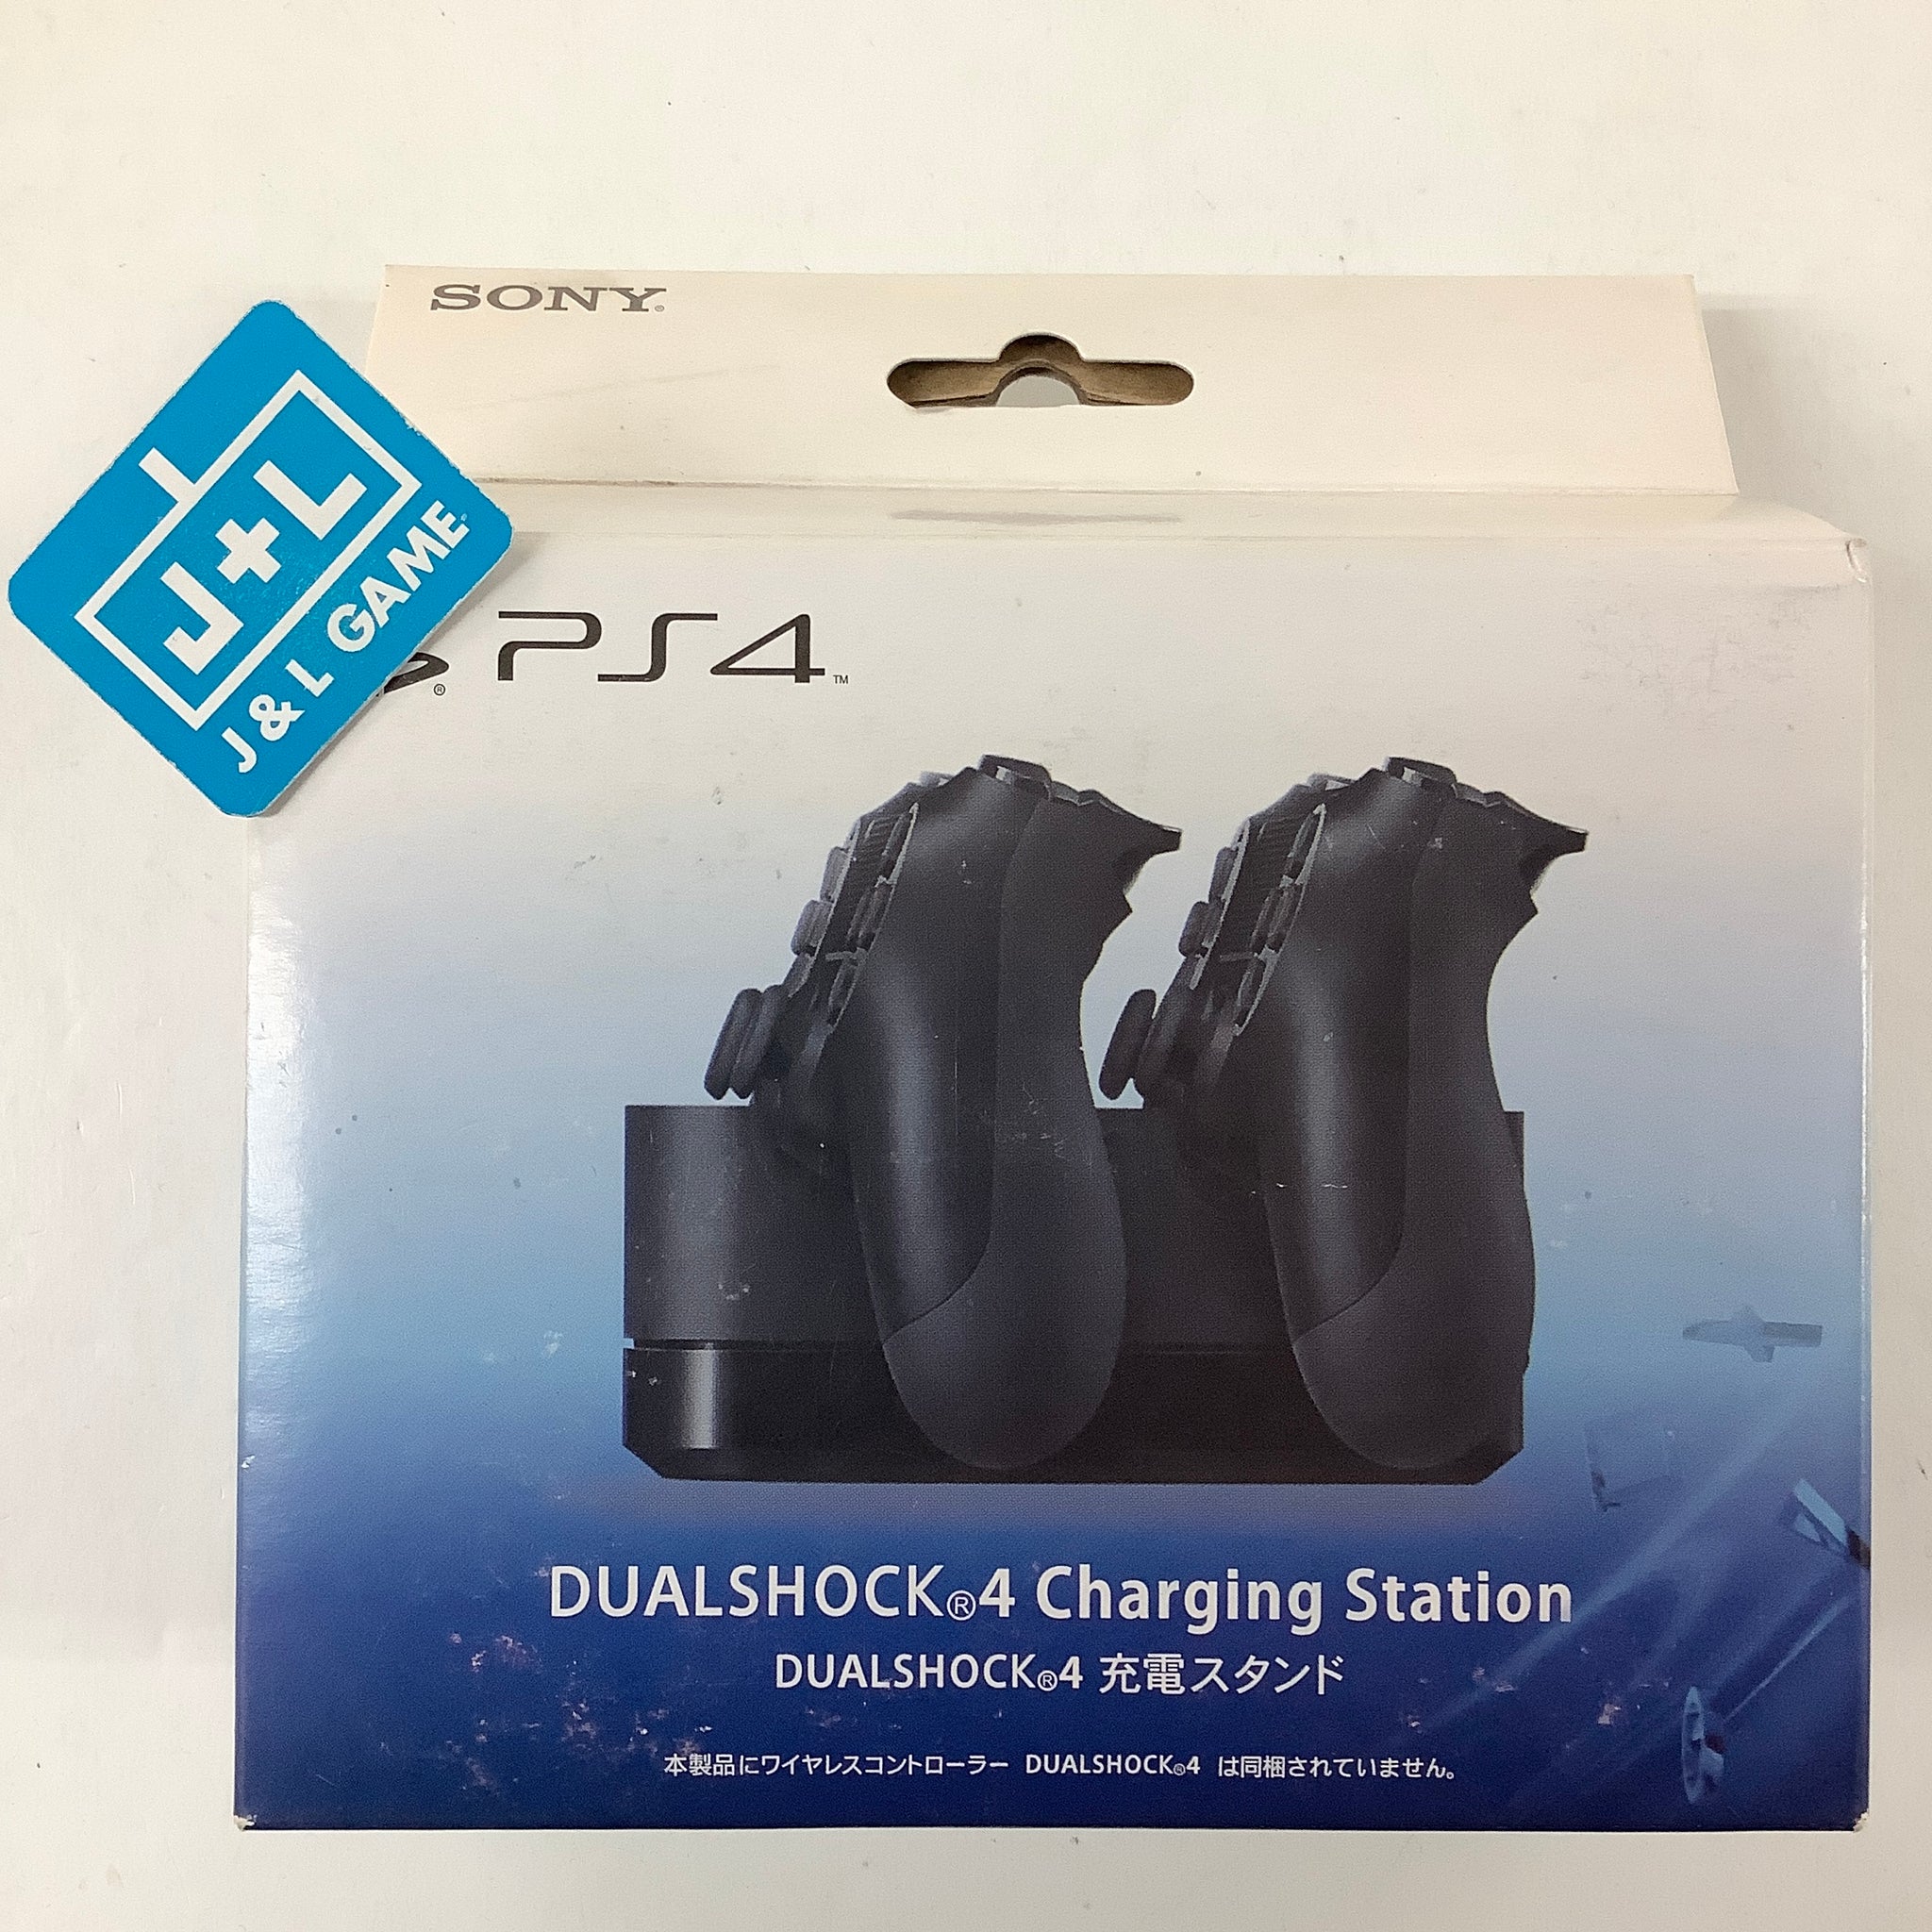 SONY DualShock 4 Charging Station - (PS4) PlayStation 4 (Japanese Import) Accessories Sony   